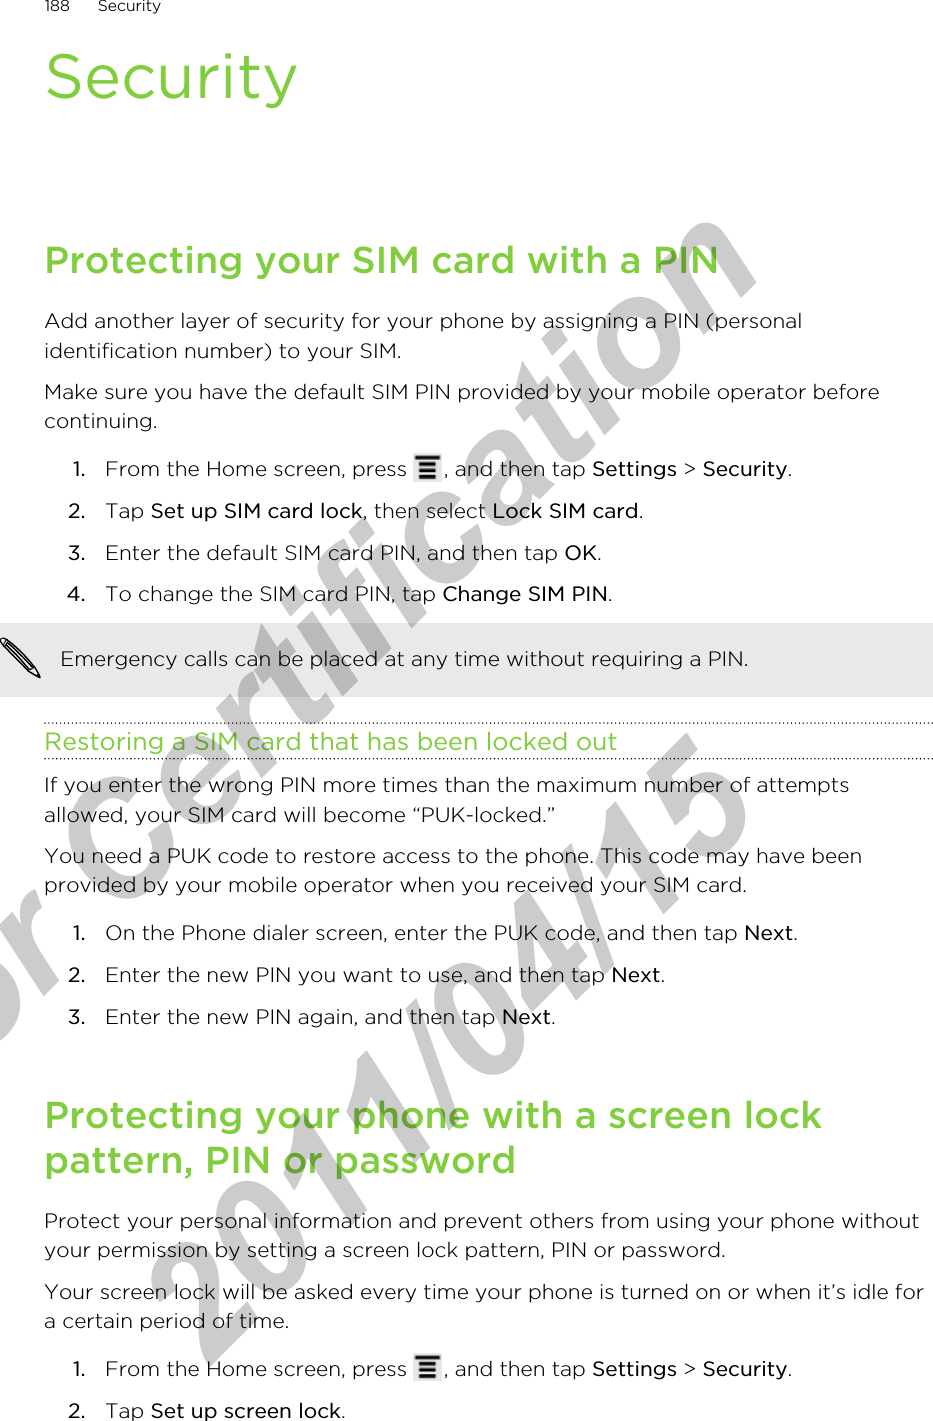 SecurityProtecting your SIM card with a PINAdd another layer of security for your phone by assigning a PIN (personalidentification number) to your SIM.Make sure you have the default SIM PIN provided by your mobile operator beforecontinuing.1. From the Home screen, press  , and then tap Settings &gt; Security.2. Tap Set up SIM card lock, then select Lock SIM card.3. Enter the default SIM card PIN, and then tap OK.4. To change the SIM card PIN, tap Change SIM PIN. Emergency calls can be placed at any time without requiring a PIN.Restoring a SIM card that has been locked outIf you enter the wrong PIN more times than the maximum number of attemptsallowed, your SIM card will become “PUK-locked.”You need a PUK code to restore access to the phone. This code may have beenprovided by your mobile operator when you received your SIM card.1. On the Phone dialer screen, enter the PUK code, and then tap Next.2. Enter the new PIN you want to use, and then tap Next.3. Enter the new PIN again, and then tap Next.Protecting your phone with a screen lockpattern, PIN or passwordProtect your personal information and prevent others from using your phone withoutyour permission by setting a screen lock pattern, PIN or password.Your screen lock will be asked every time your phone is turned on or when it’s idle fora certain period of time.1. From the Home screen, press  , and then tap Settings &gt; Security.2. Tap Set up screen lock.188 Securityfor Certification  2011/04/15